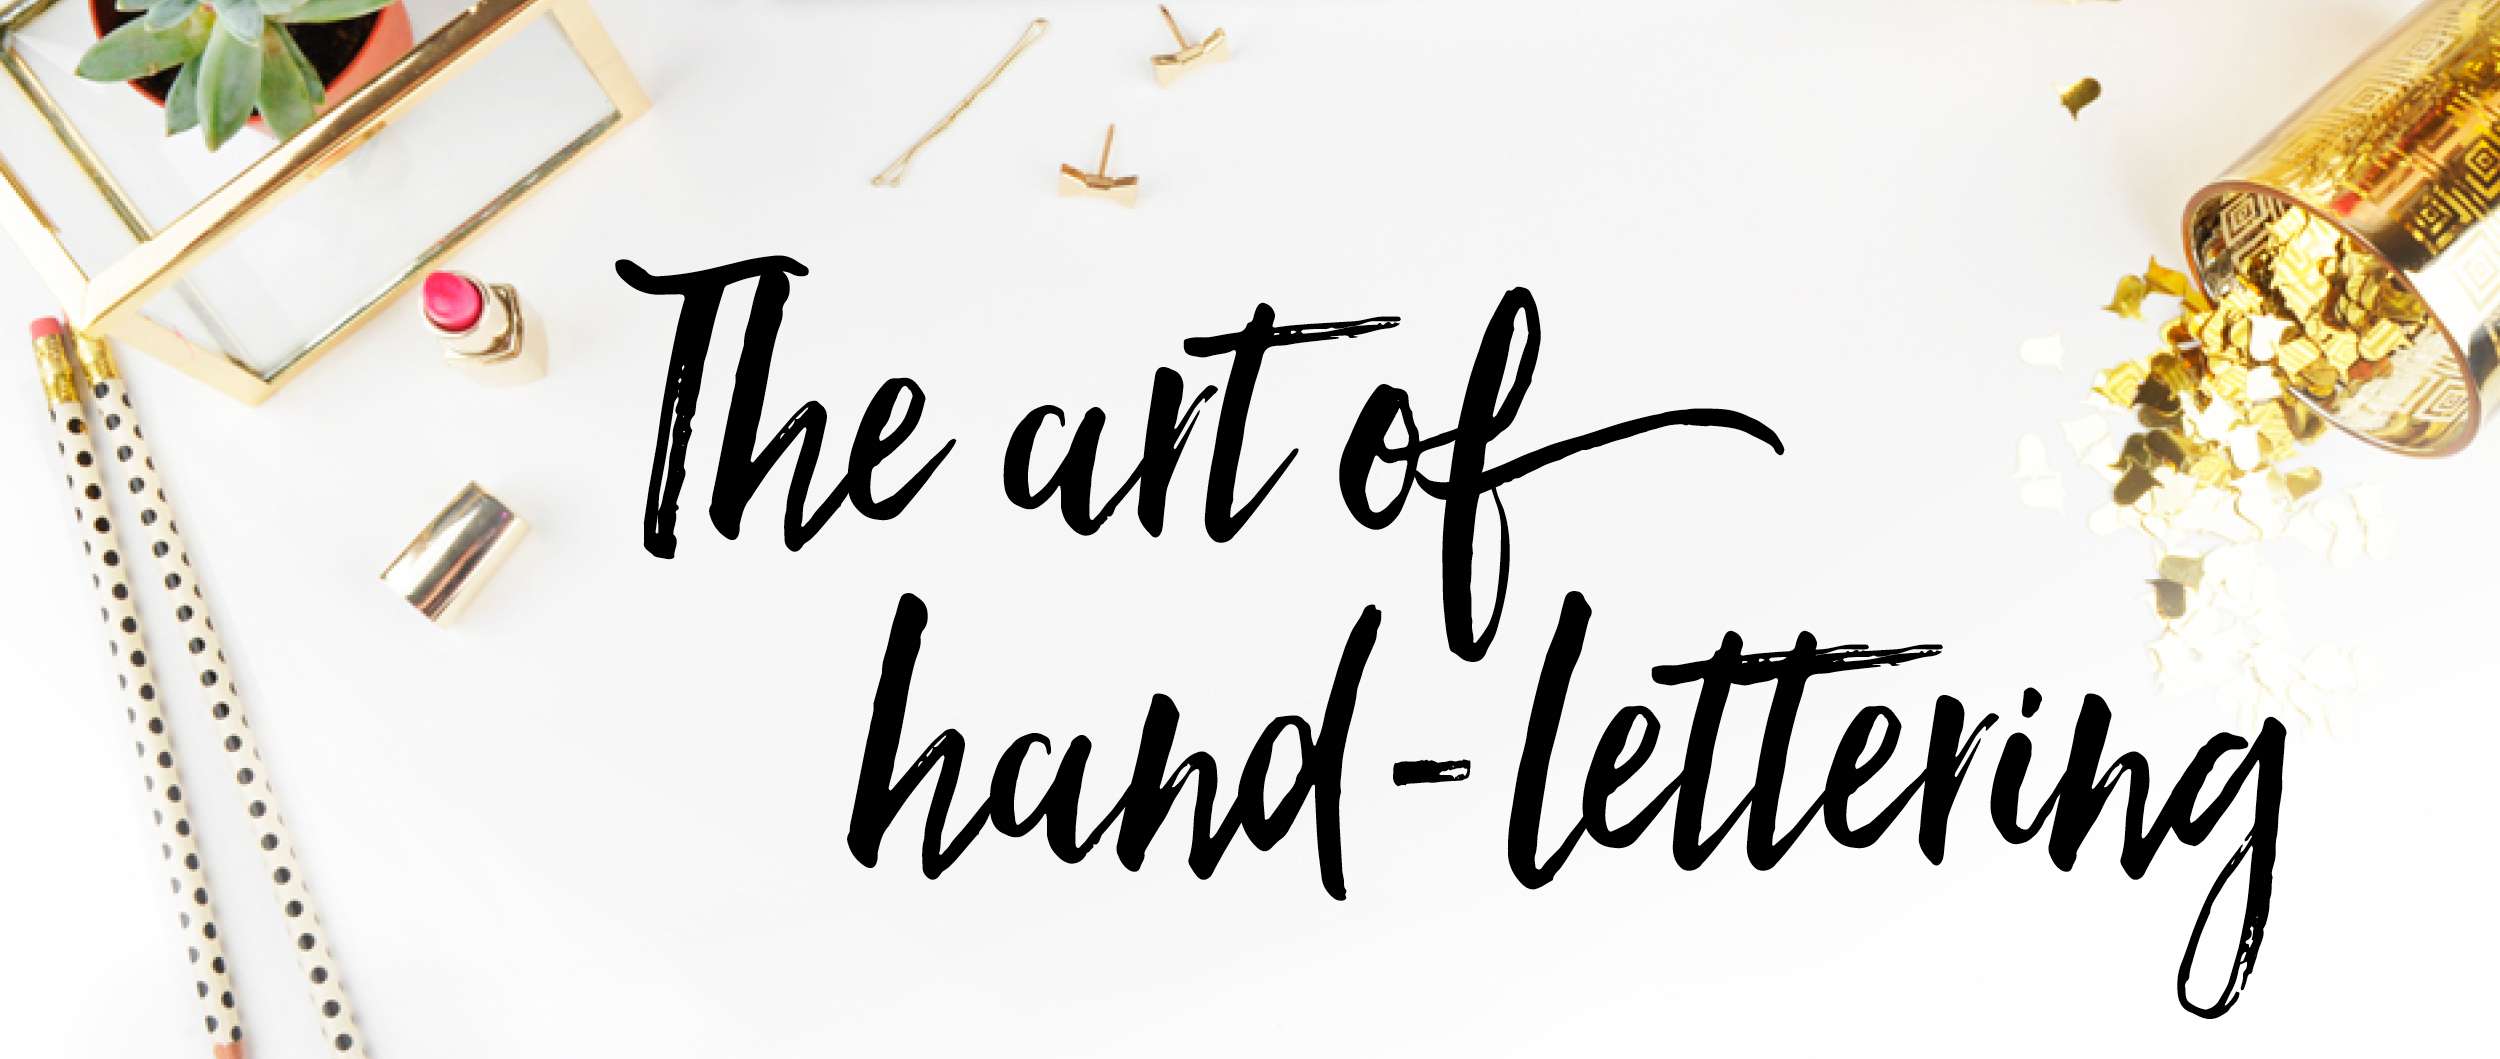 The art of hand-lettering